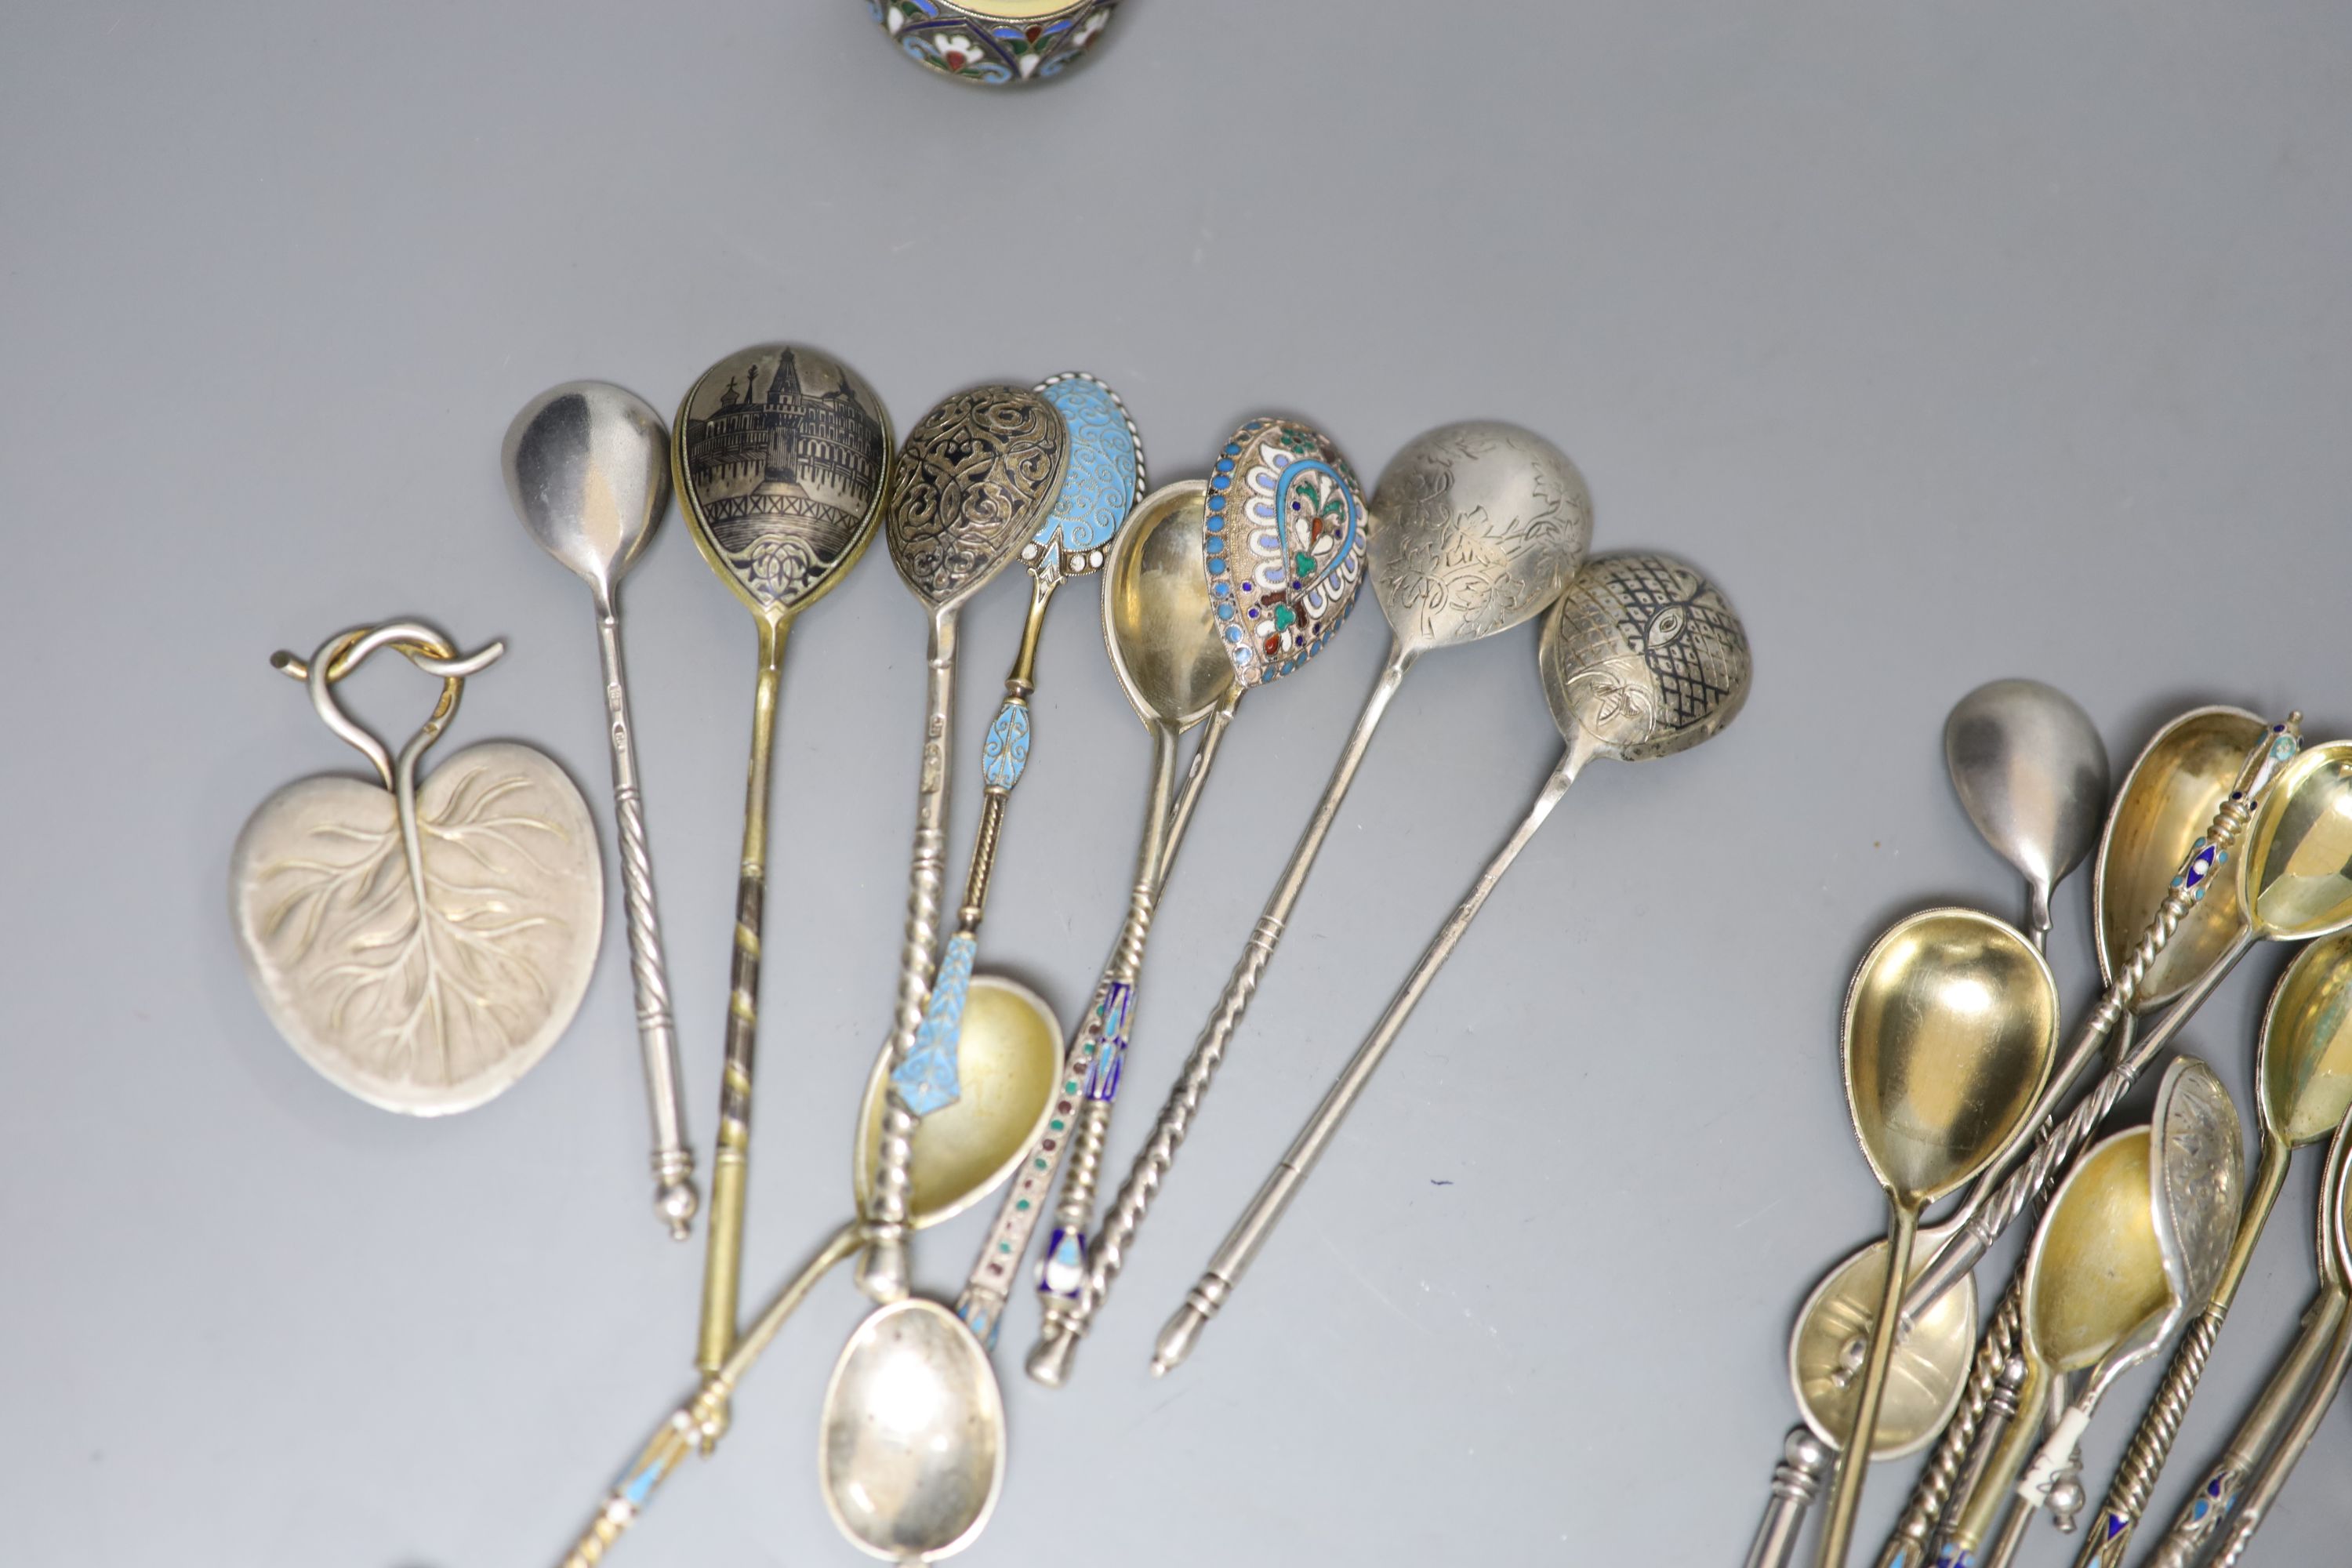 A small collection of Russian and Russian style white metal spoons etc, some with enamel or niello decoration.